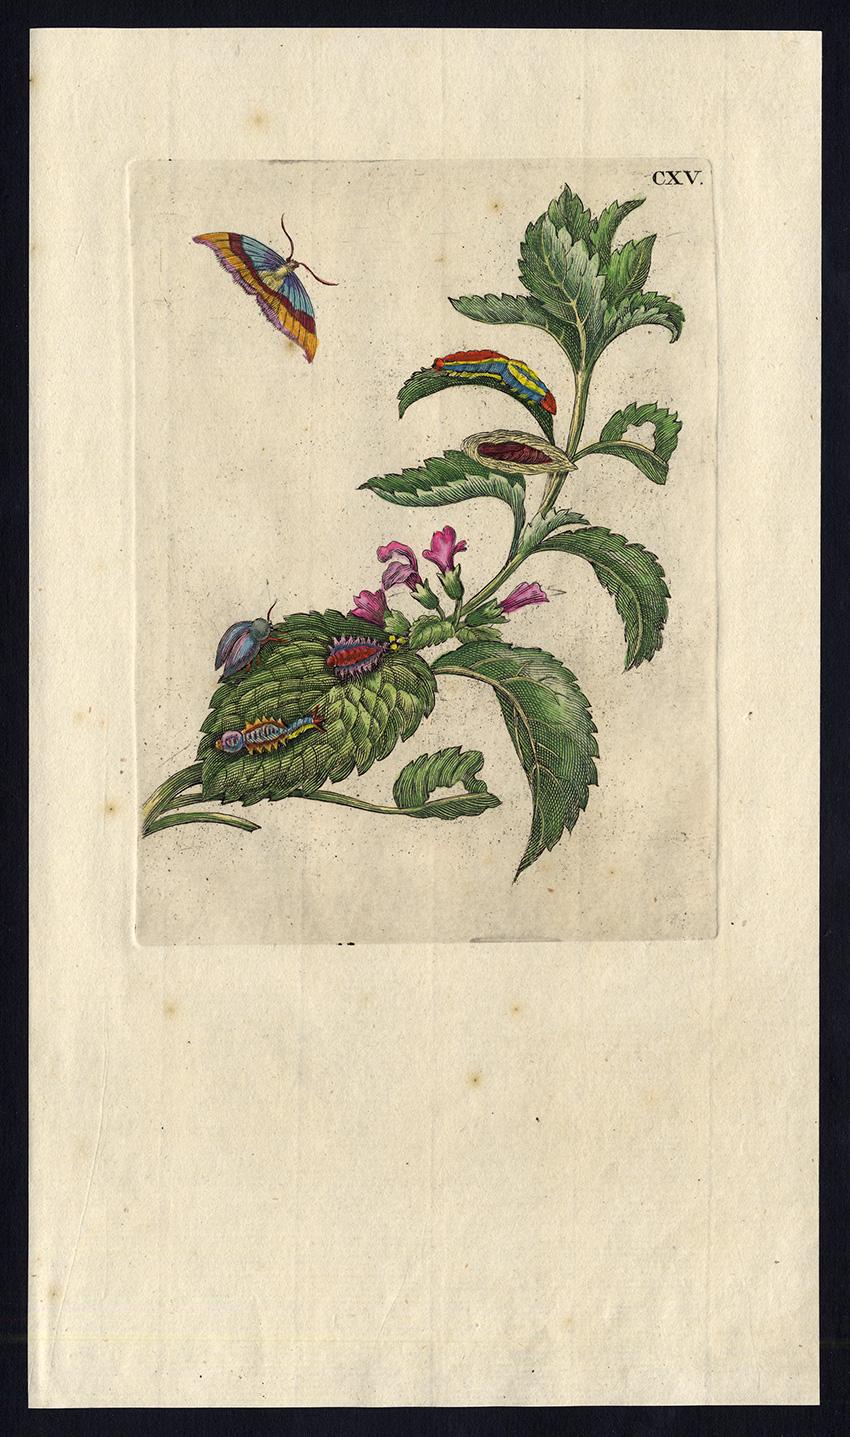 Maria Sybilla Merian Animal Print - Melissa and Balm with insects by Merian - Handcoloured engraving - 18th century